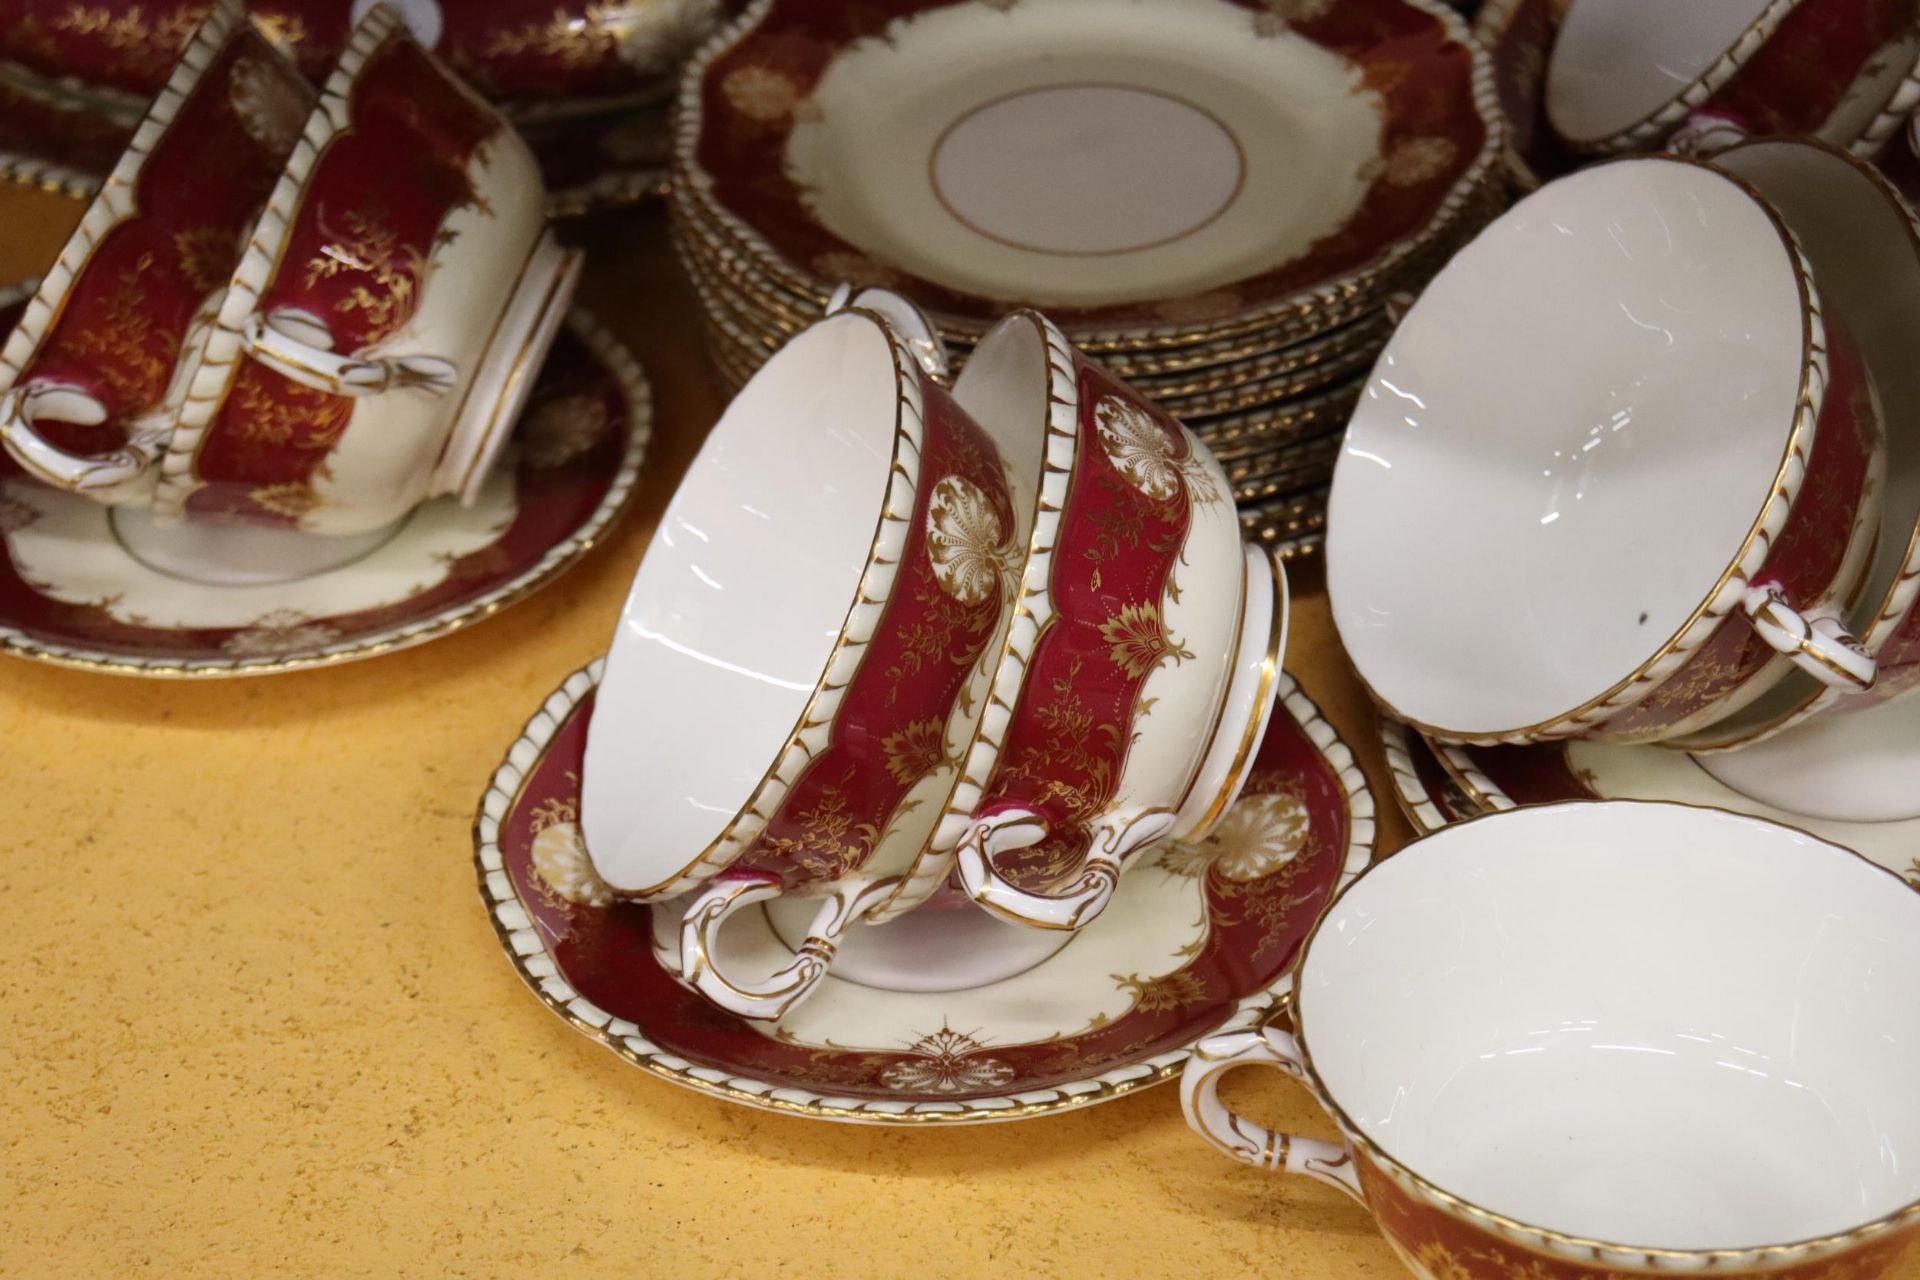 AN EIGHTY EIGHT PIECE ROYAL WORCESTER HATFIELD RED DINNER SERVICE GOLD SHELLS AND LEAVES WITH A - Image 2 of 7